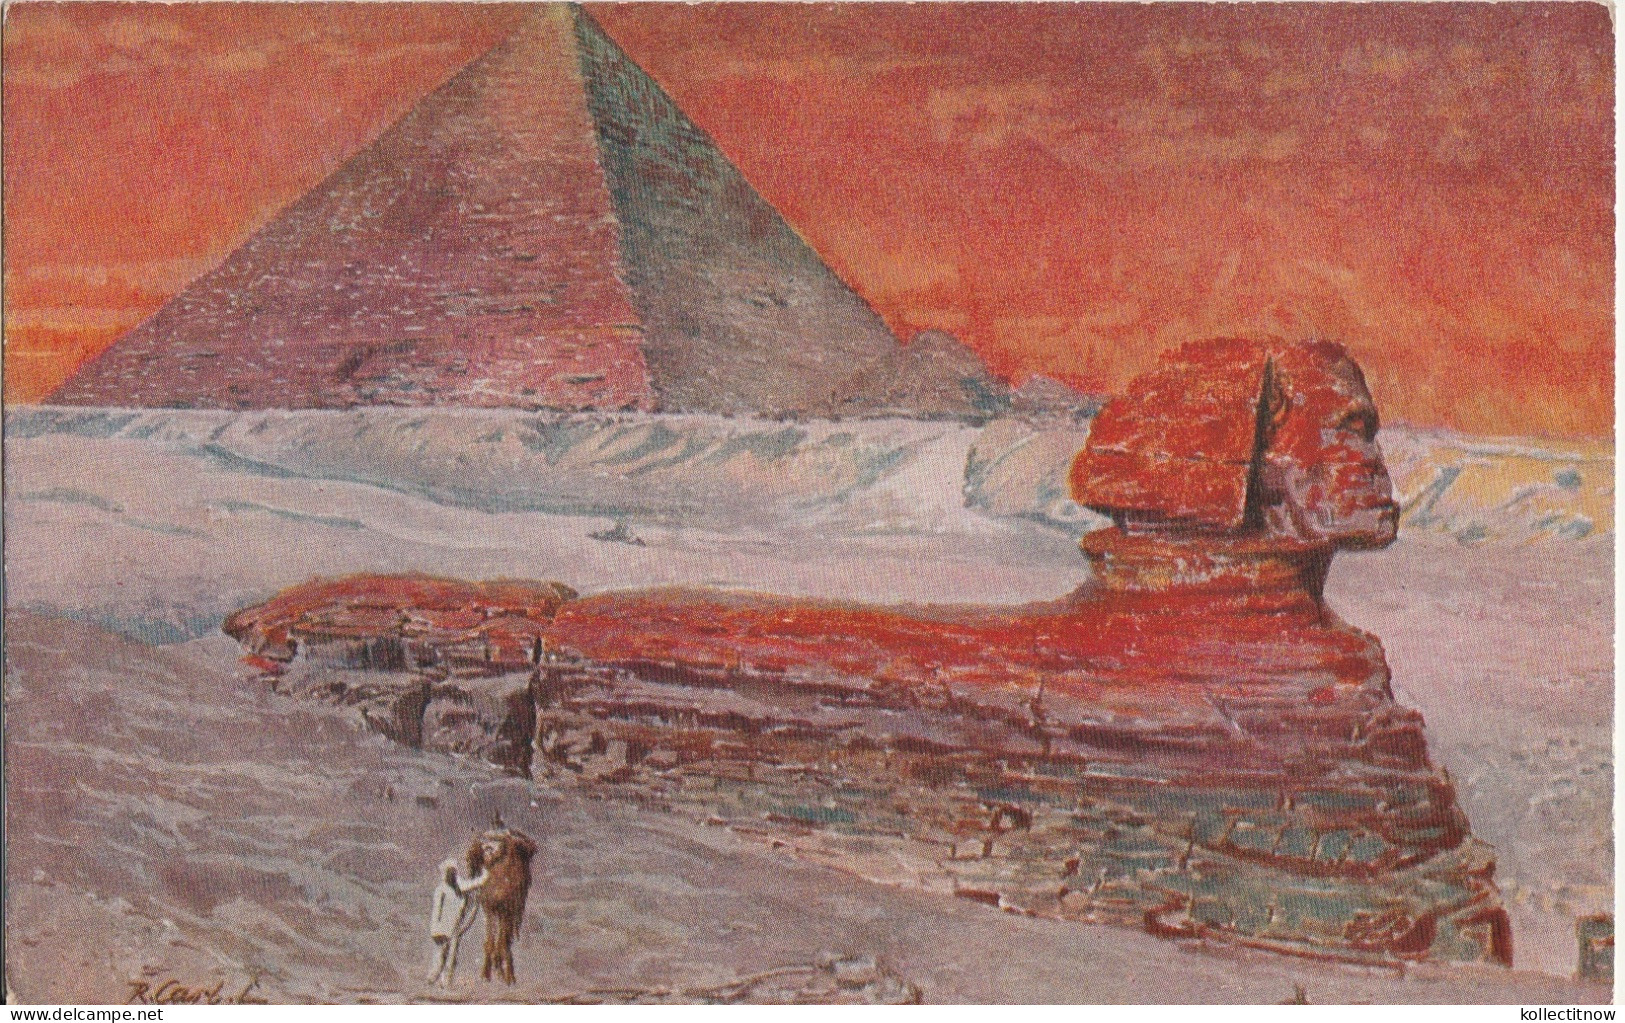 THE SPHINX AND THE PYRAMIDE OF CHEOPS - Sphinx